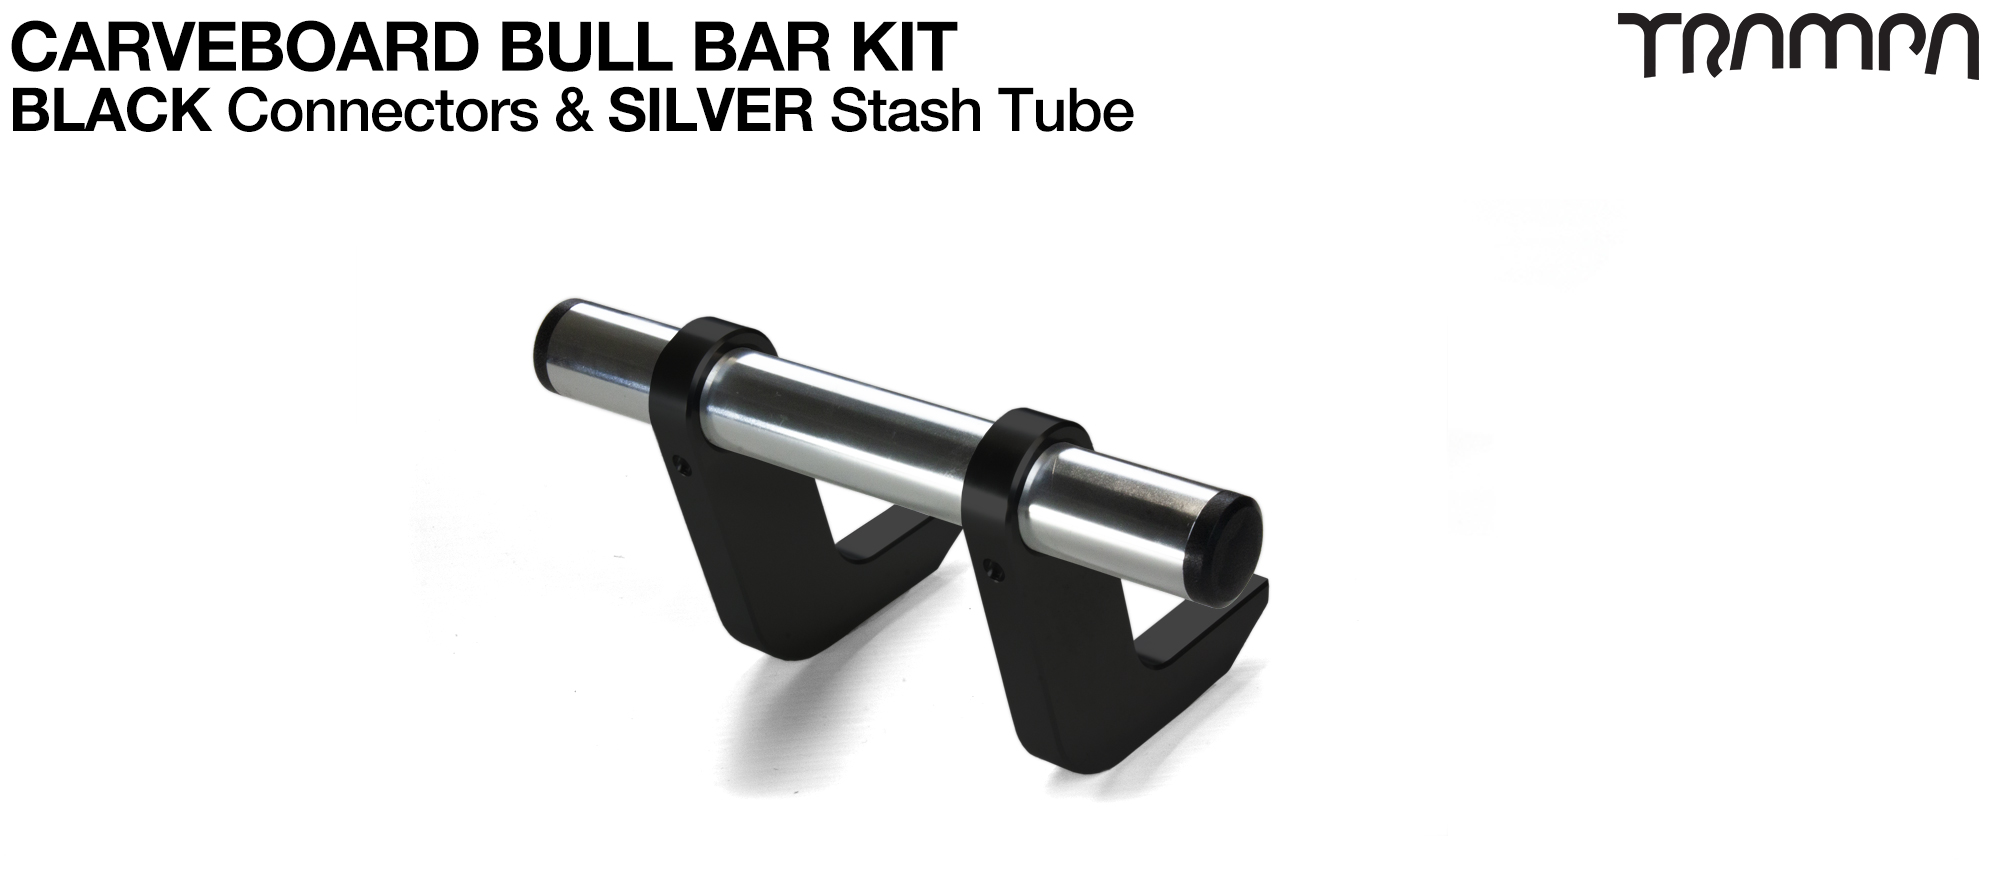 BLACK Uprights & SILVER Crossbar BULL BARS for CARVE BOARDS using T6 Heat Treated CNC'd Aluminum Clamps, Hollow Aluminium Stash Tubes with Rubber end bungs 